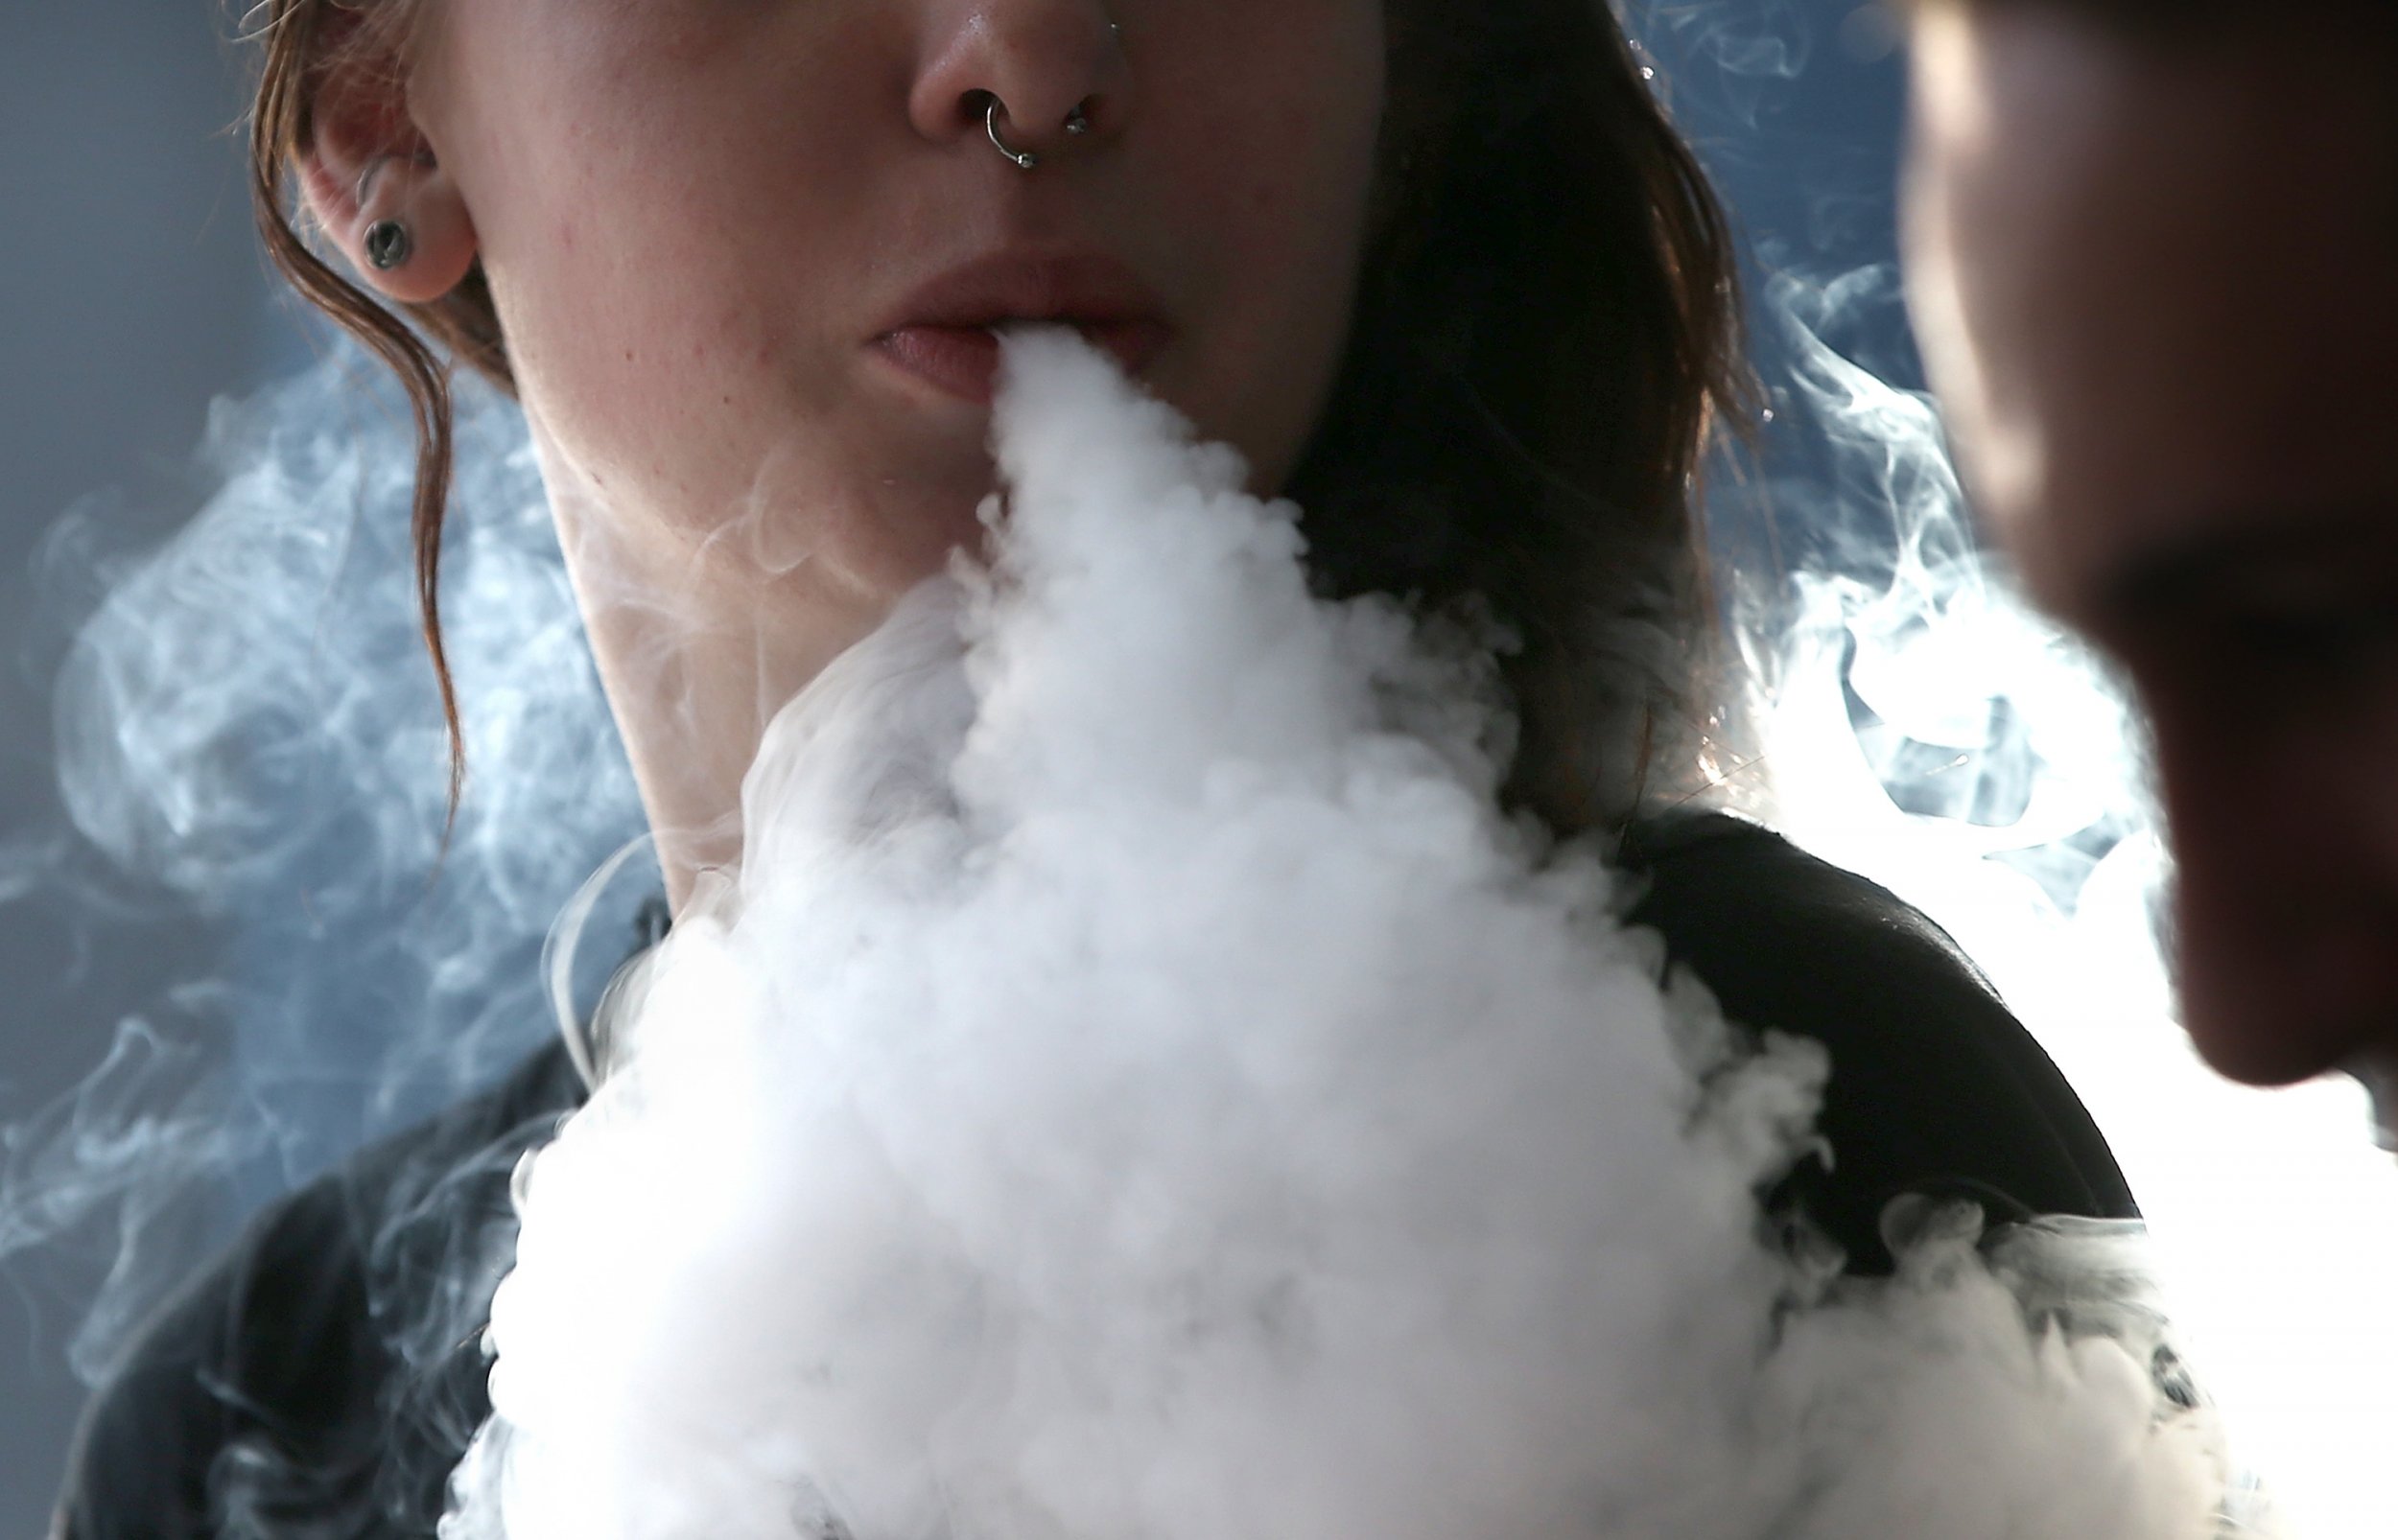 Juul Vape Is Making It Easier For Kids To Use E Cigarettes In School Study